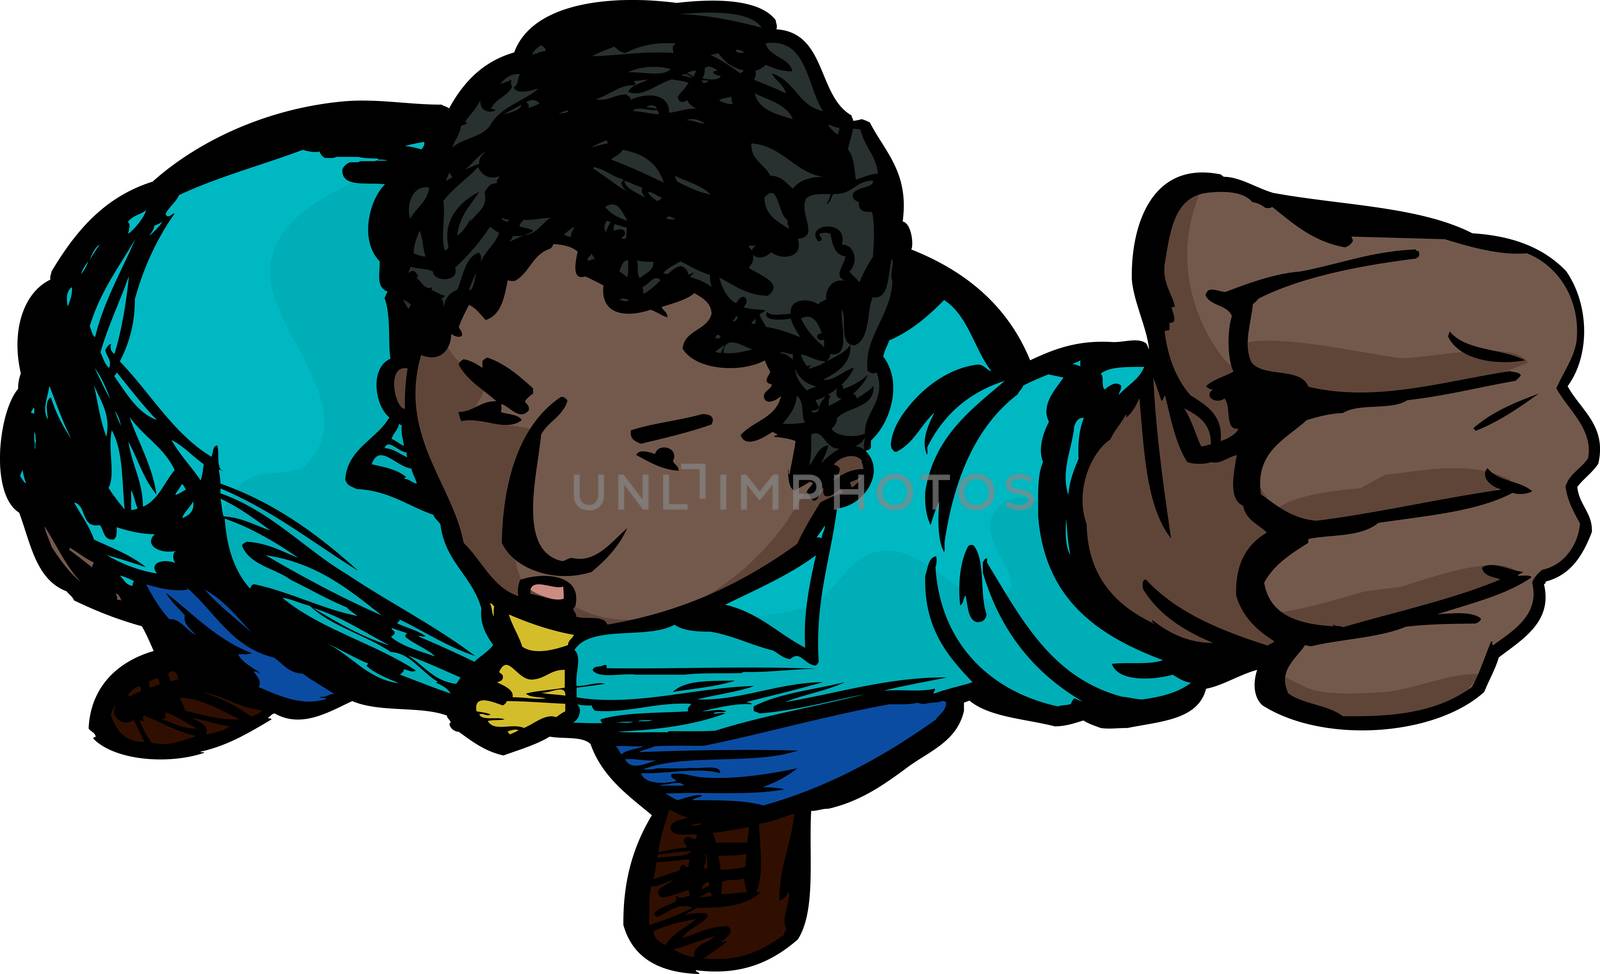 Cartoon of annoyed Black man looking up holding clenched fist